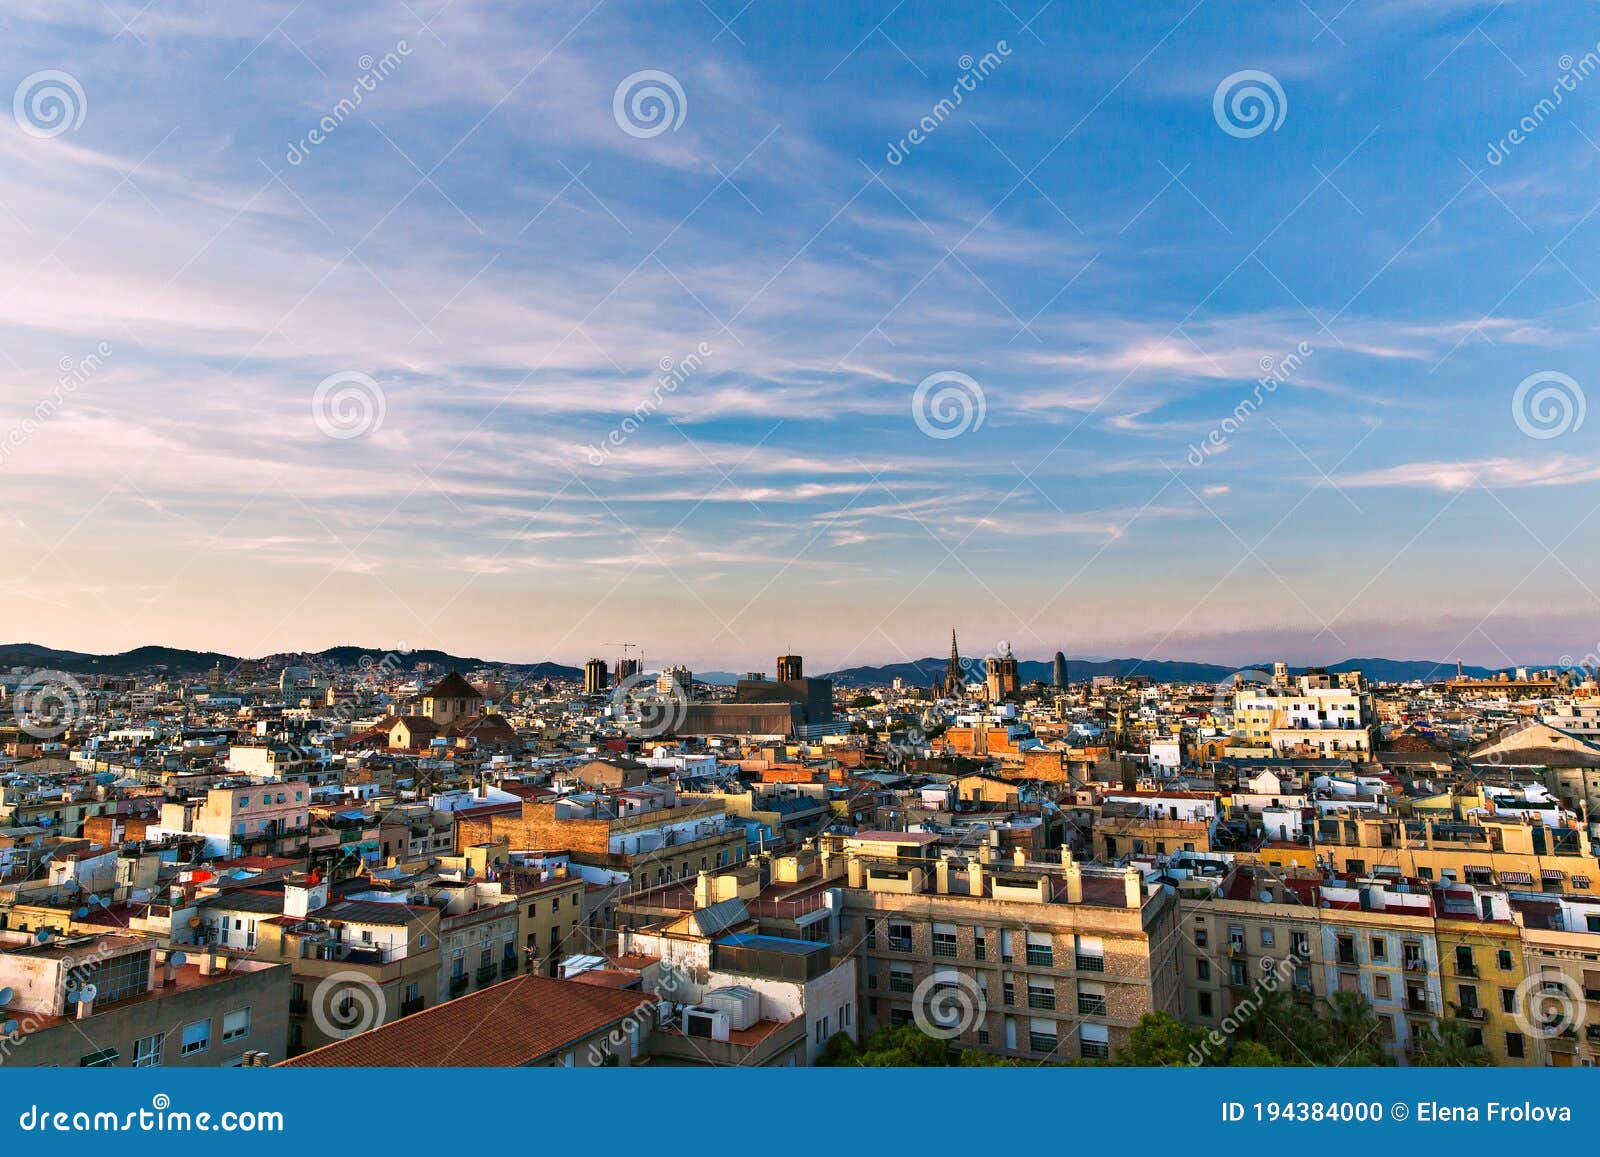 Top Panoramic View of the Barcelona Landscape. Europe, Barcelona, Spain